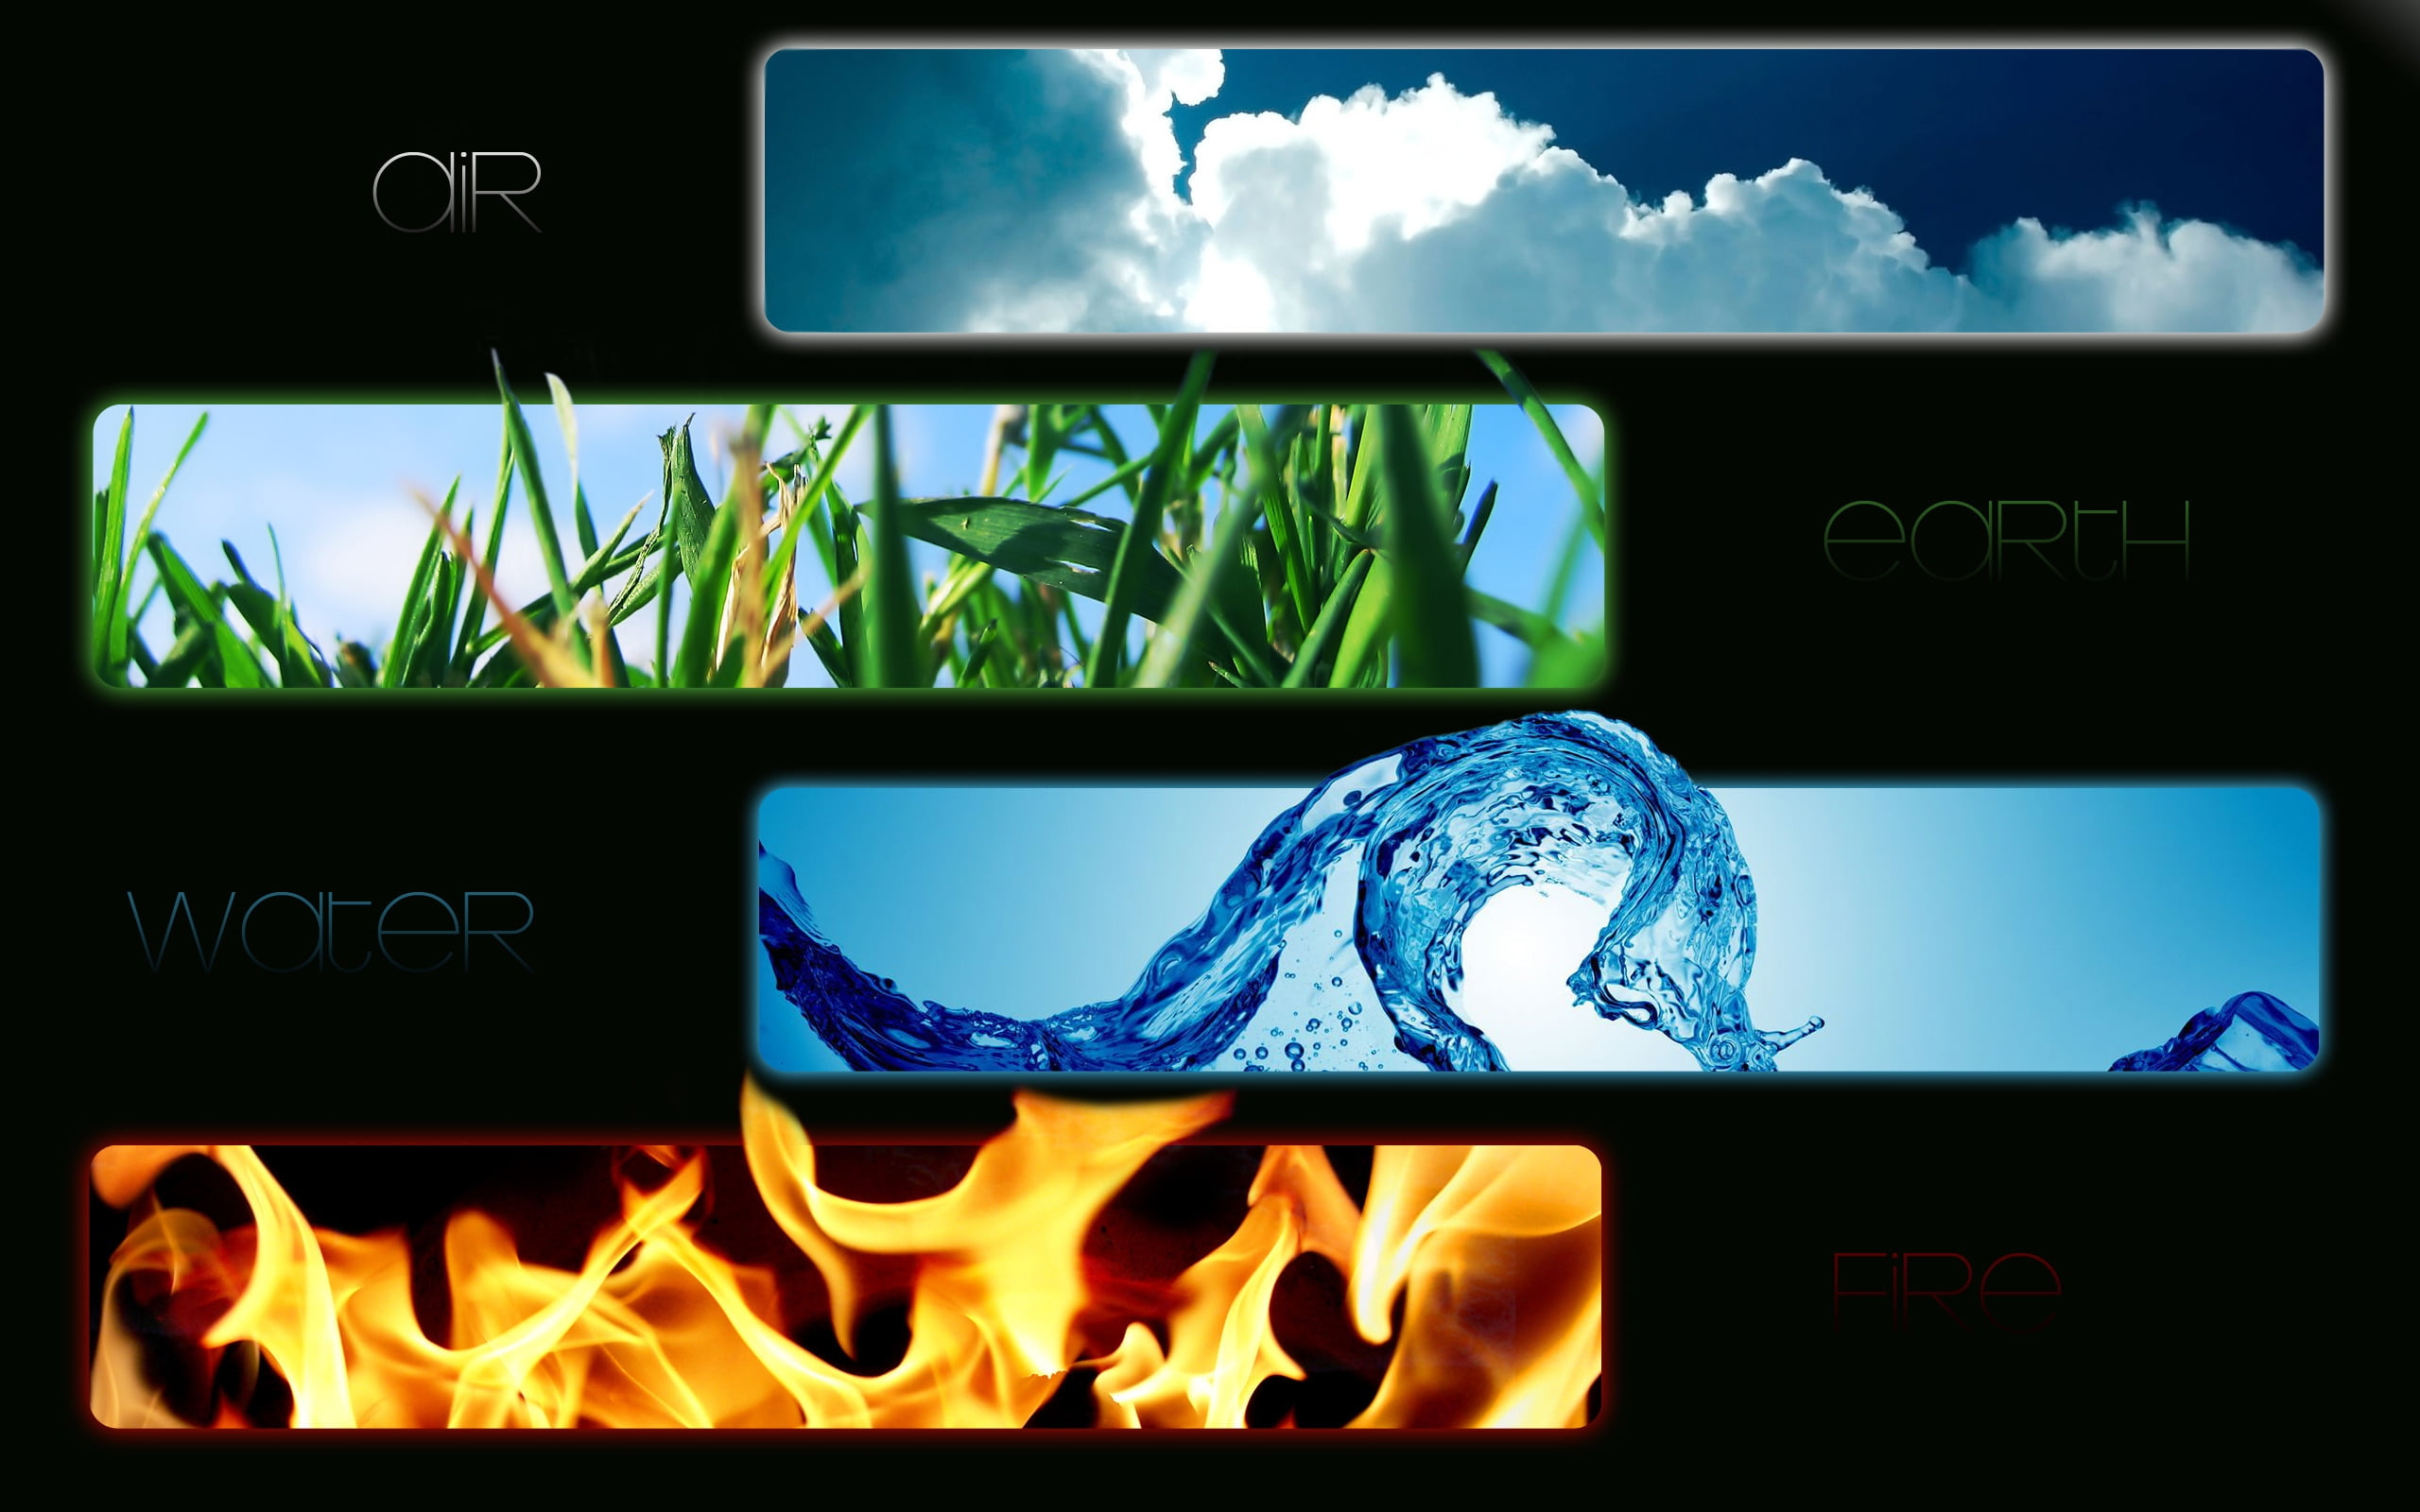 clouds, fire, grass, and water photo collage